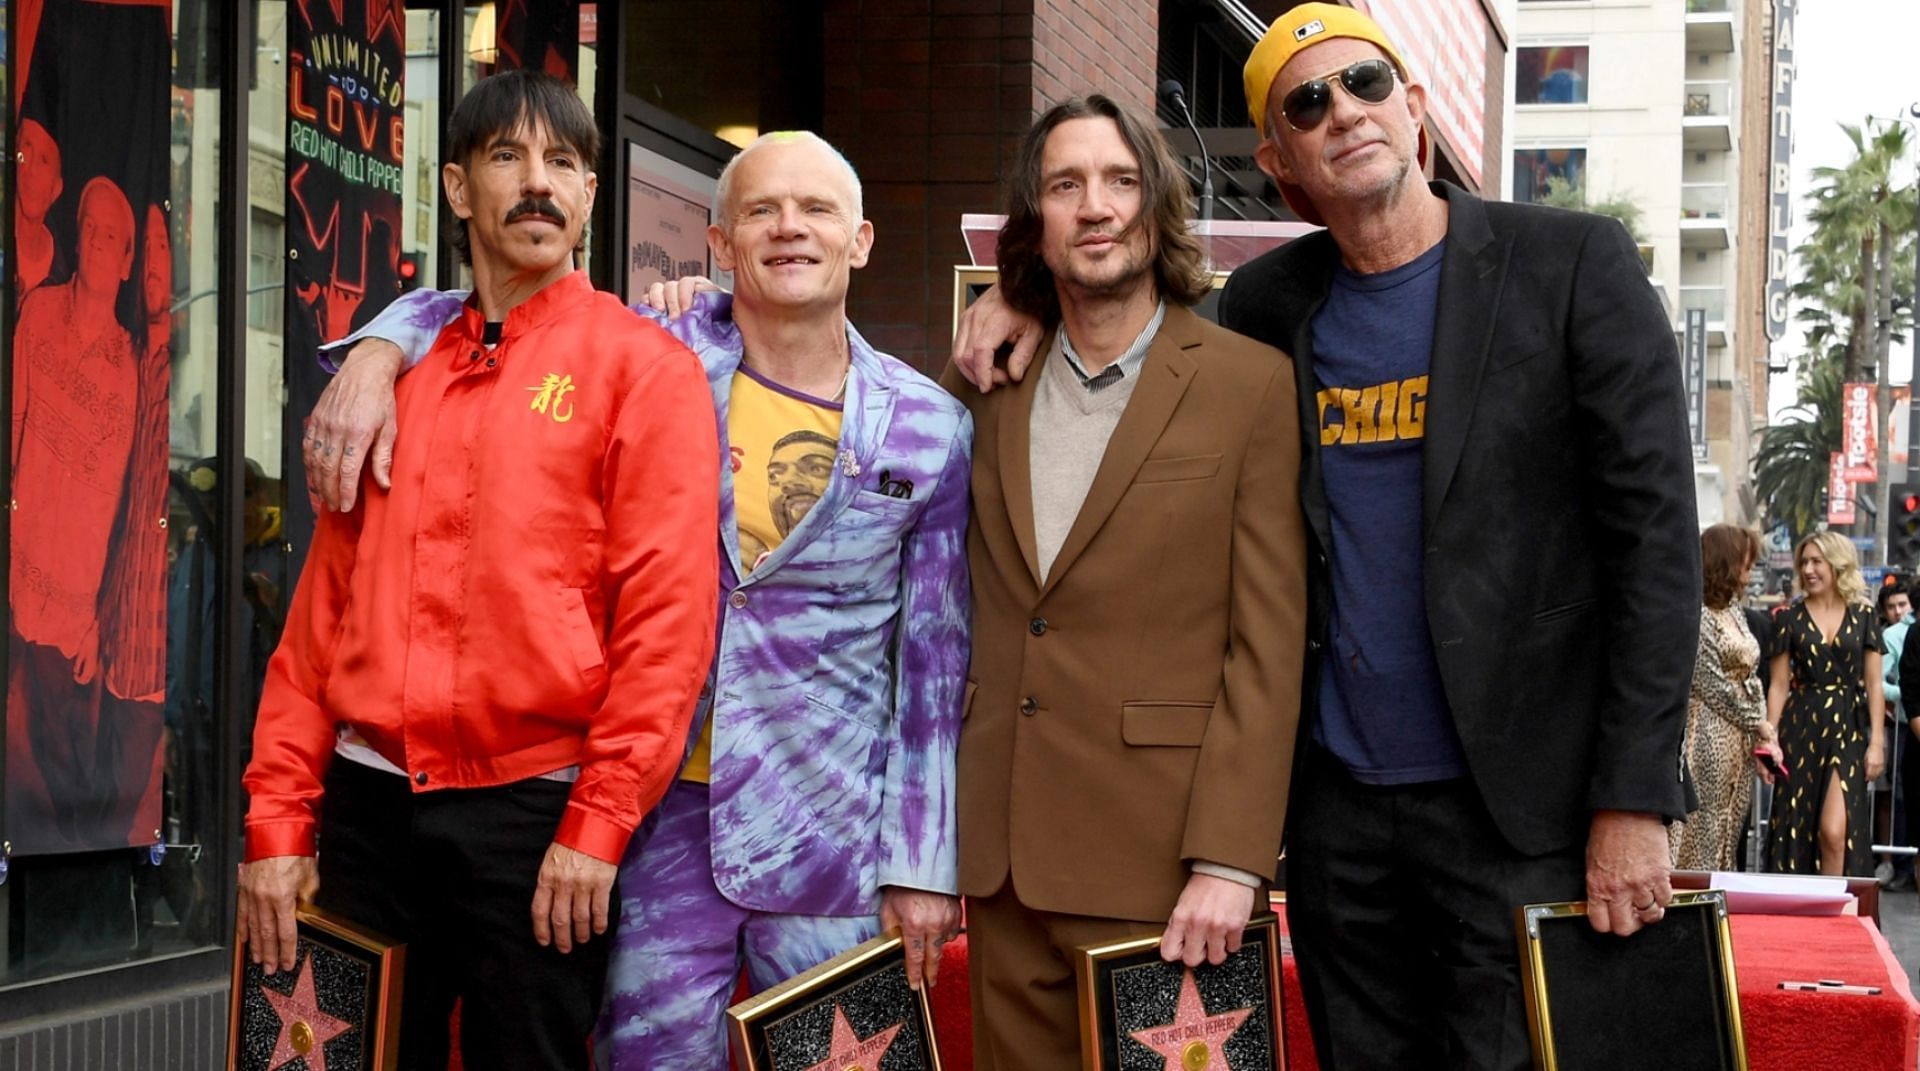 American rock band Red Hot Chilli Peppers on Thursday received a star on the Walk of Fame. (Image via Jon Kopaloff/Getty Images)